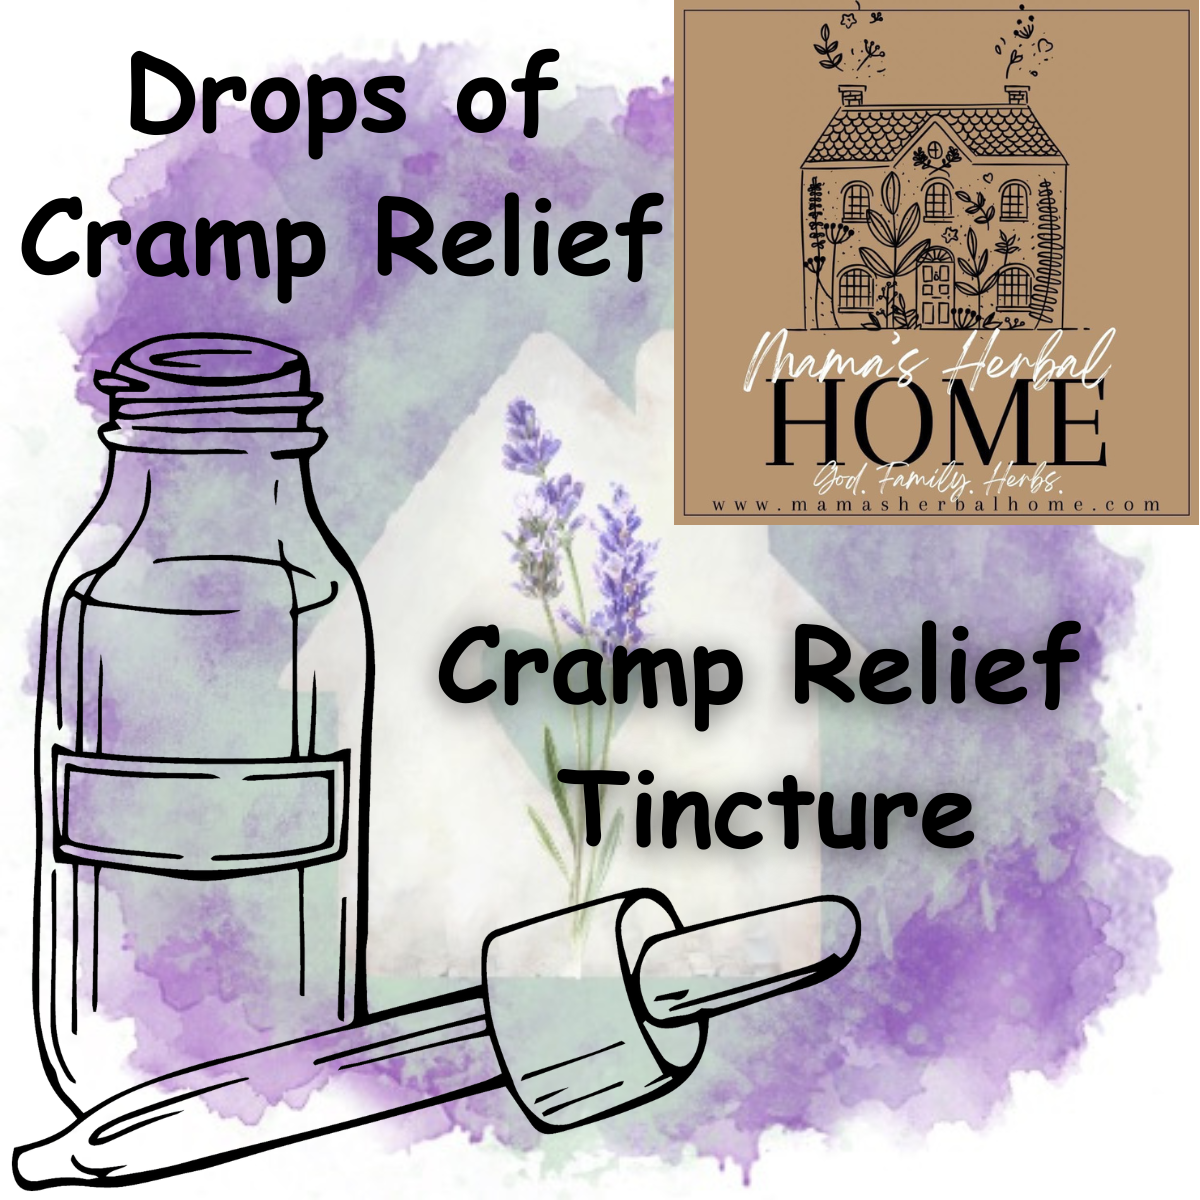 Cramp Relief Tincture | Drops of Cramp Relief | 1oz | Mama's Herbal Home